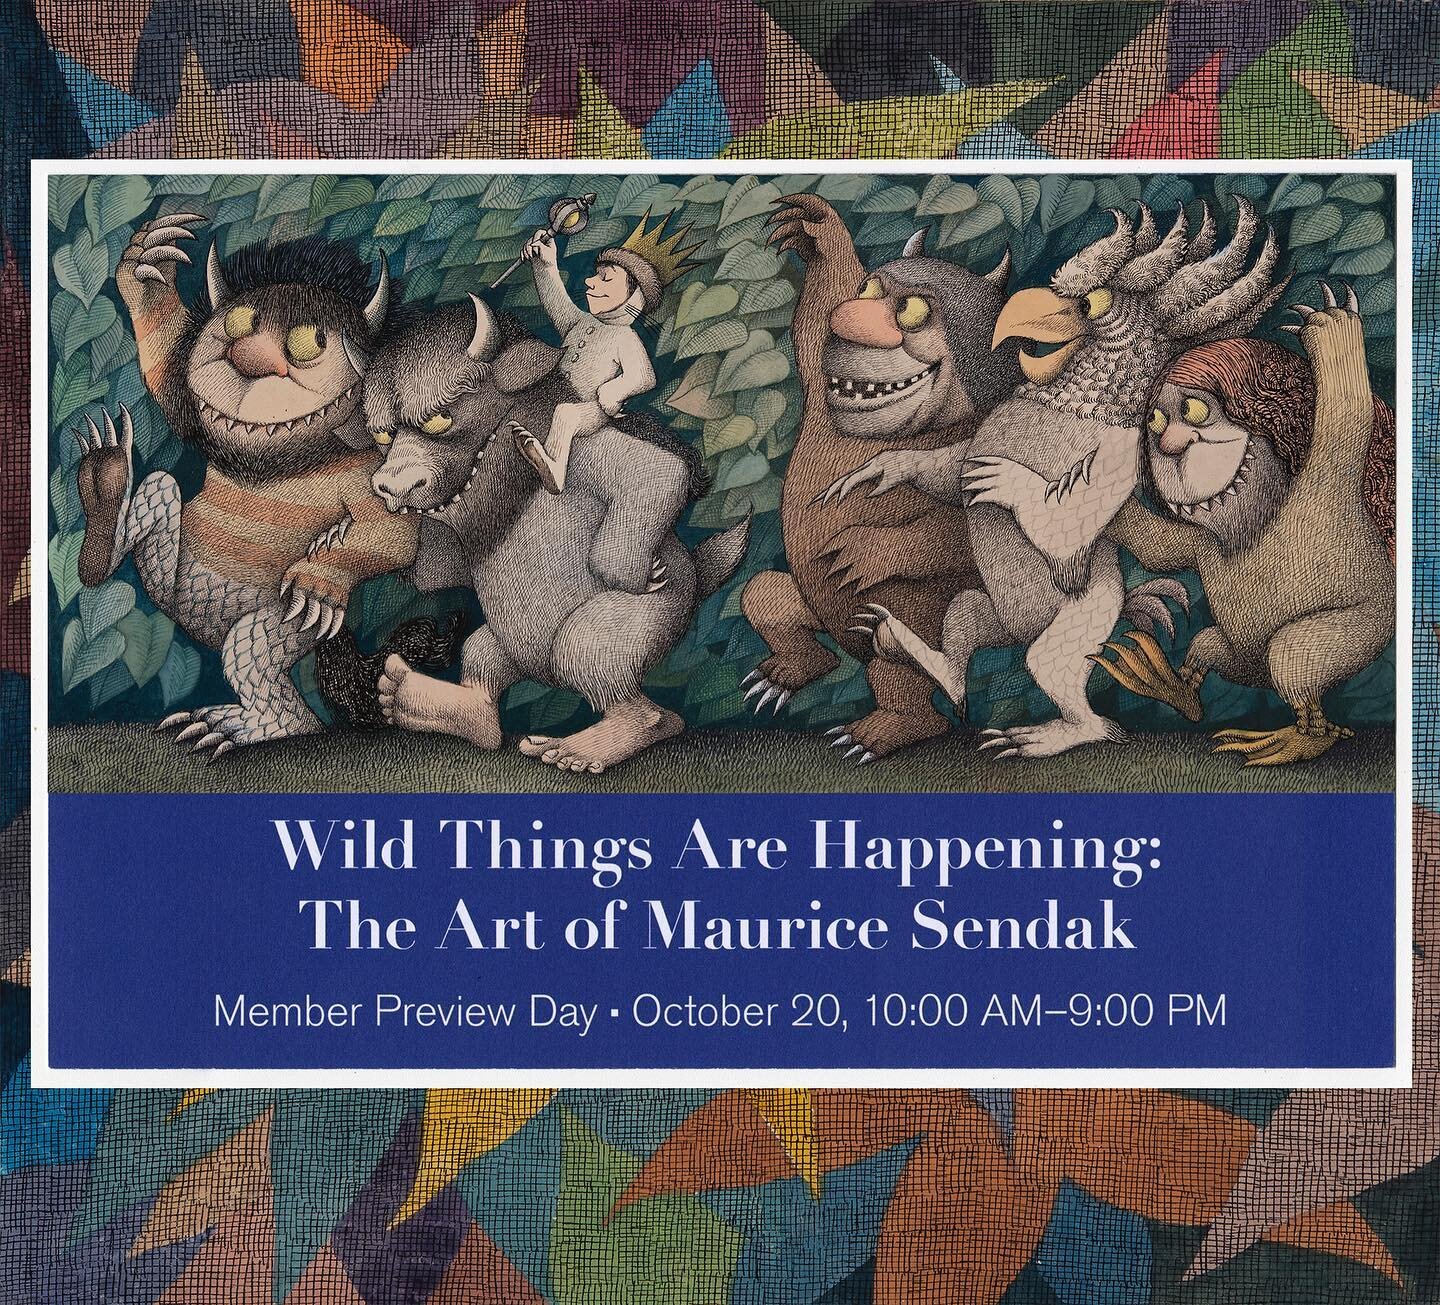 Over one hundred and fifty sketches, storyboards, drawings and paintings by Maurice Sendak from The Maurice Sendak Foundation in Ridgefield, Connecticut are now on exhibition at the Columbus Museum of Art, Columbus, Ohio. This will be the first retro